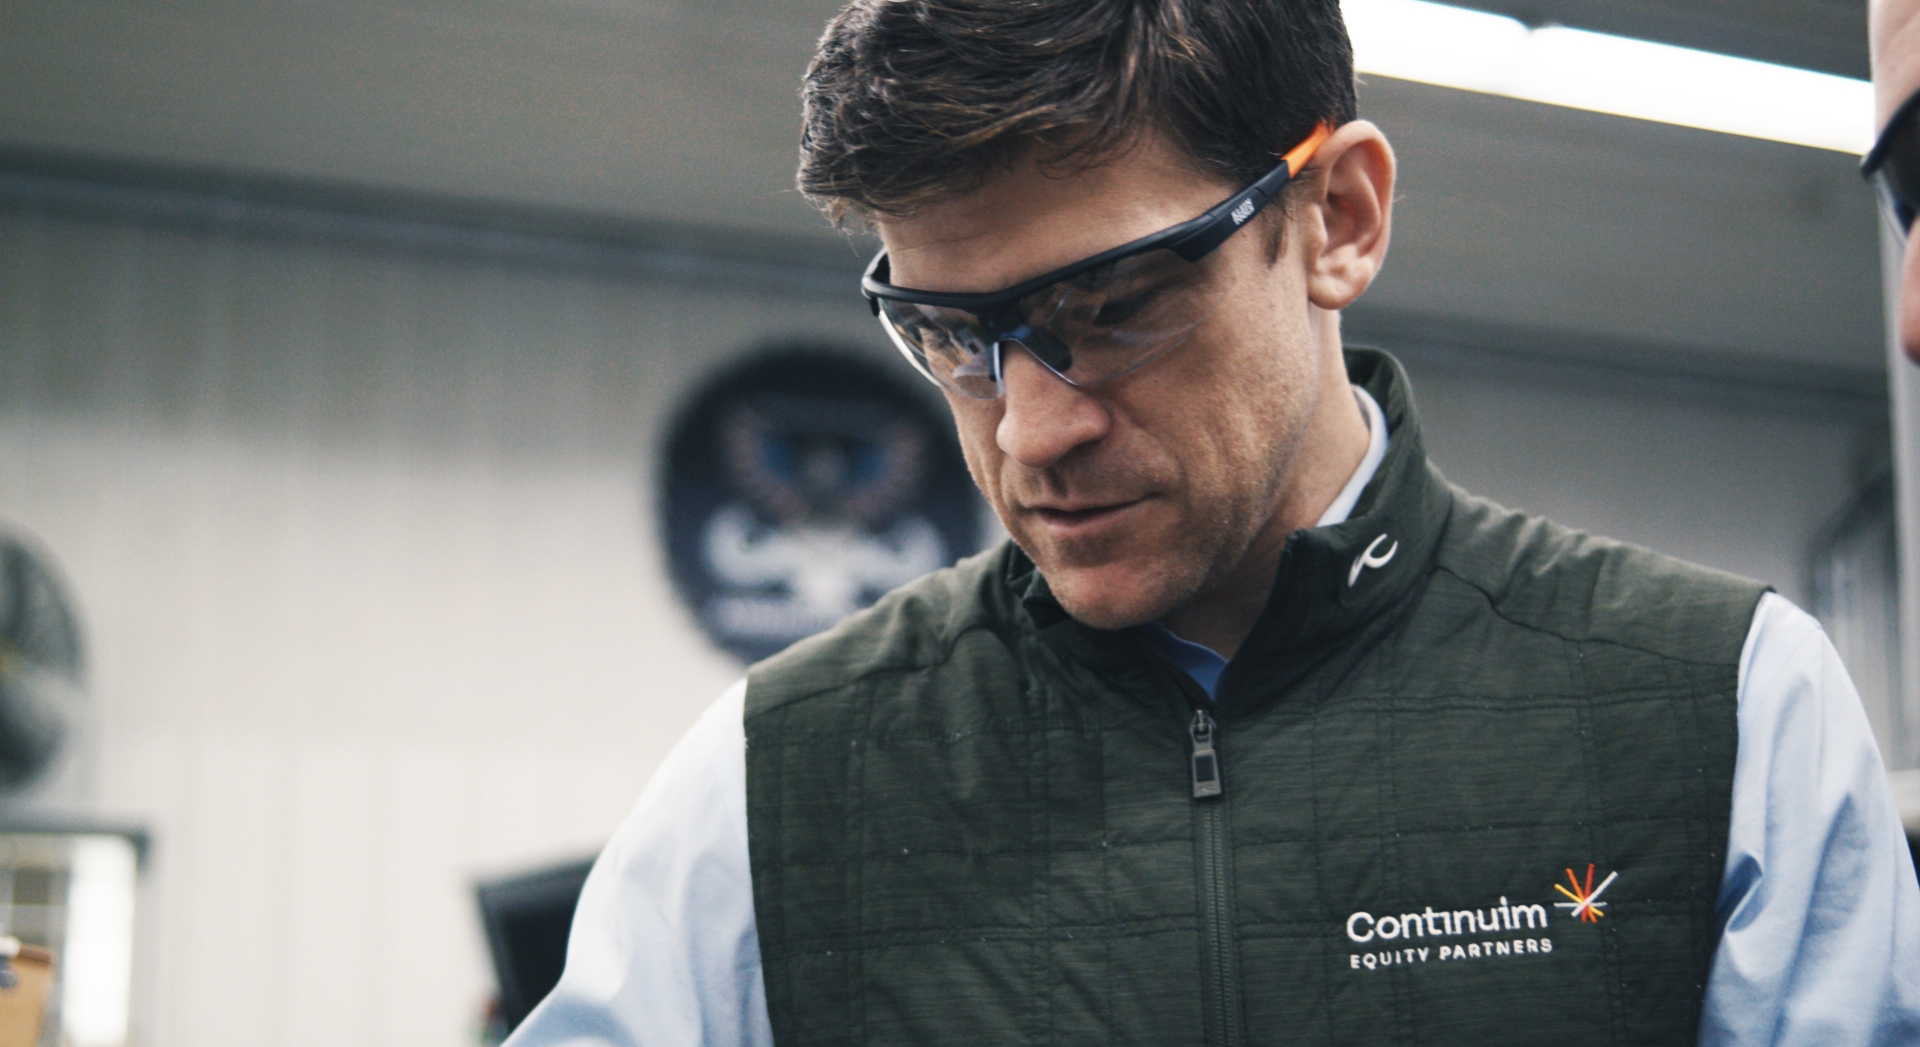 Continuim Hero Photo of continuim employee wearing safety glasses and a Continuim Equity Partners vest.